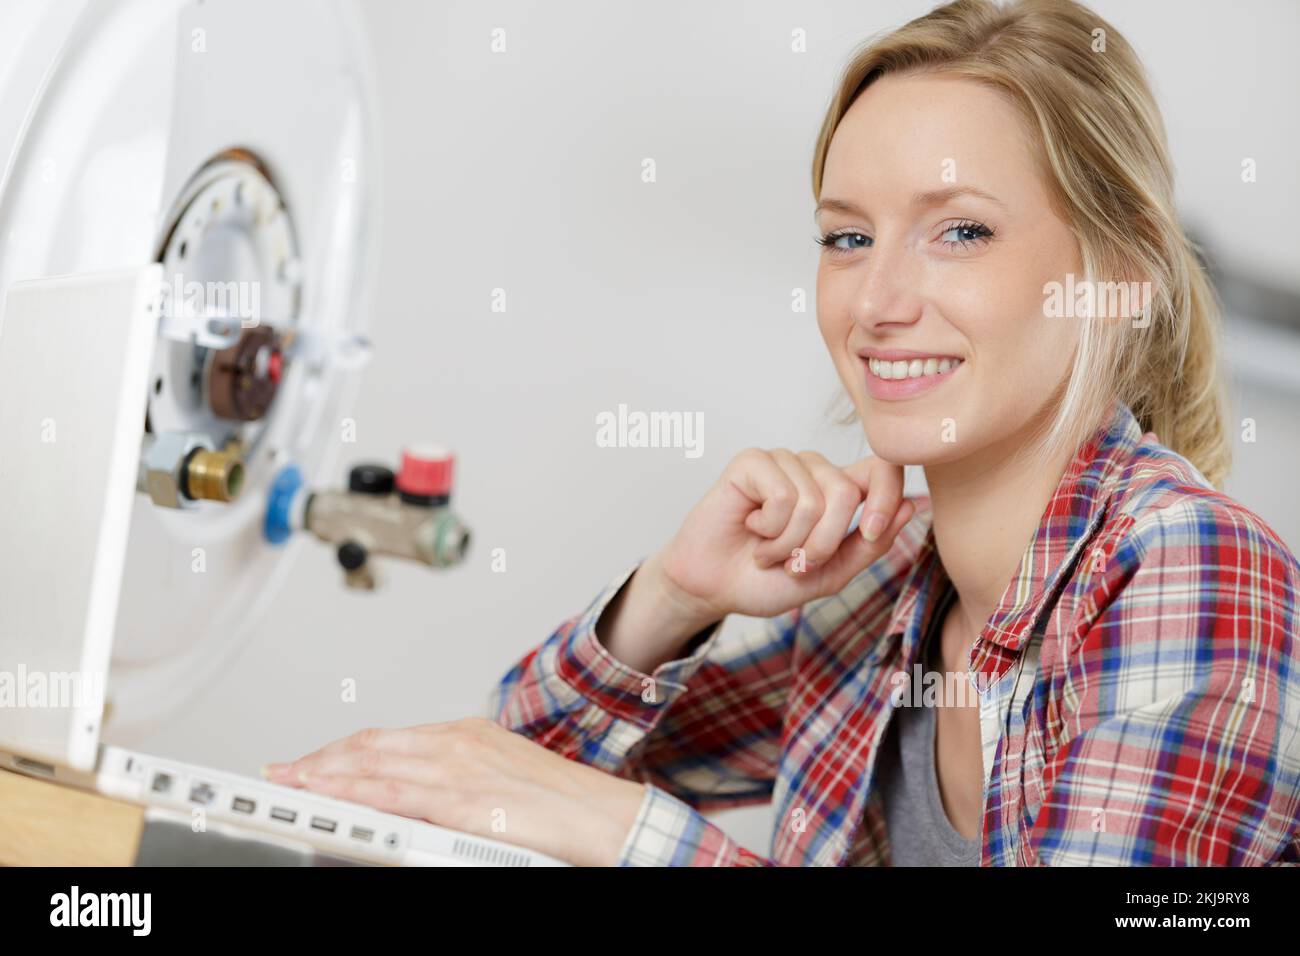 a female mechanical engineer smiling Stock Photo